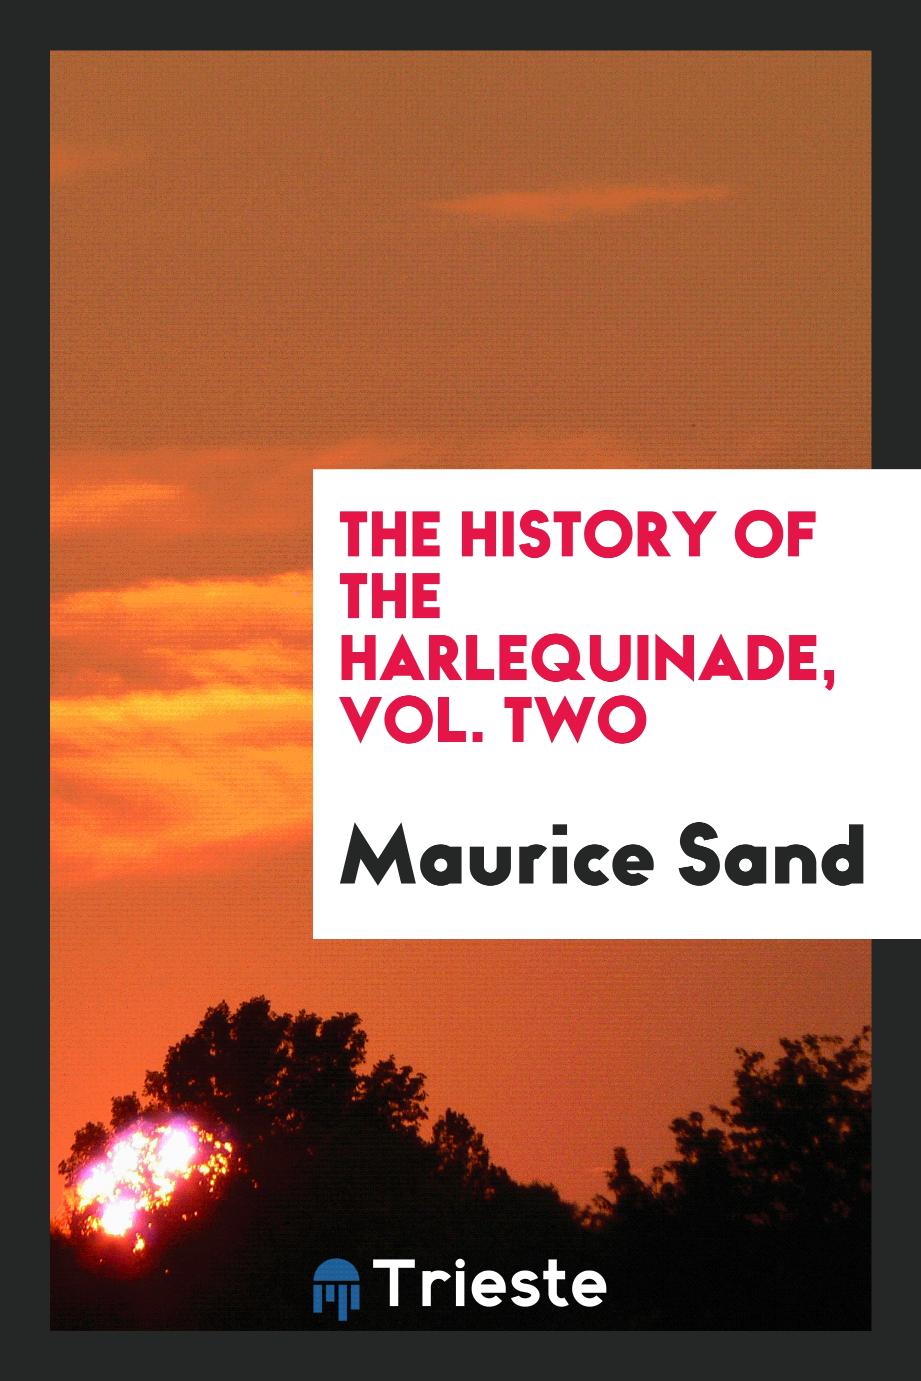 The History of the Harlequinade, Vol. Two